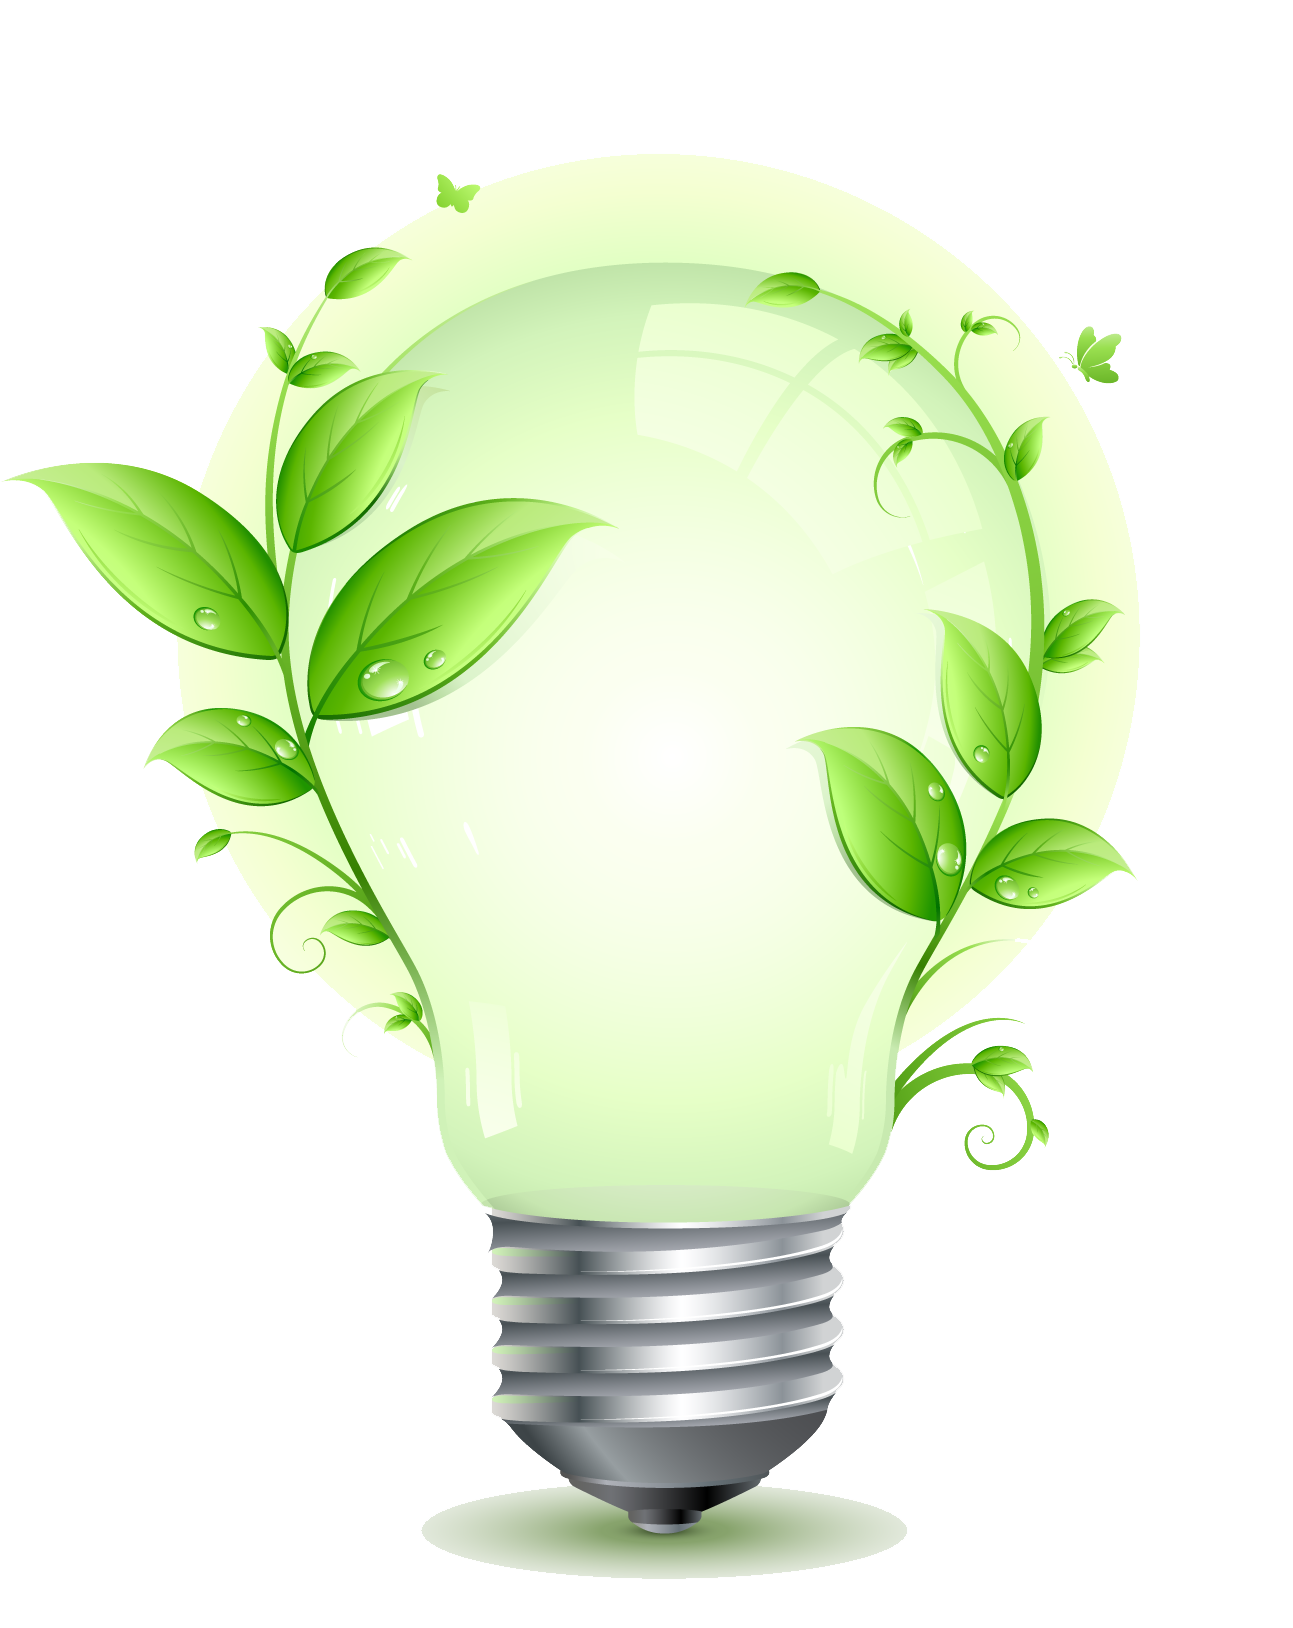 Save Electricity PNG Image